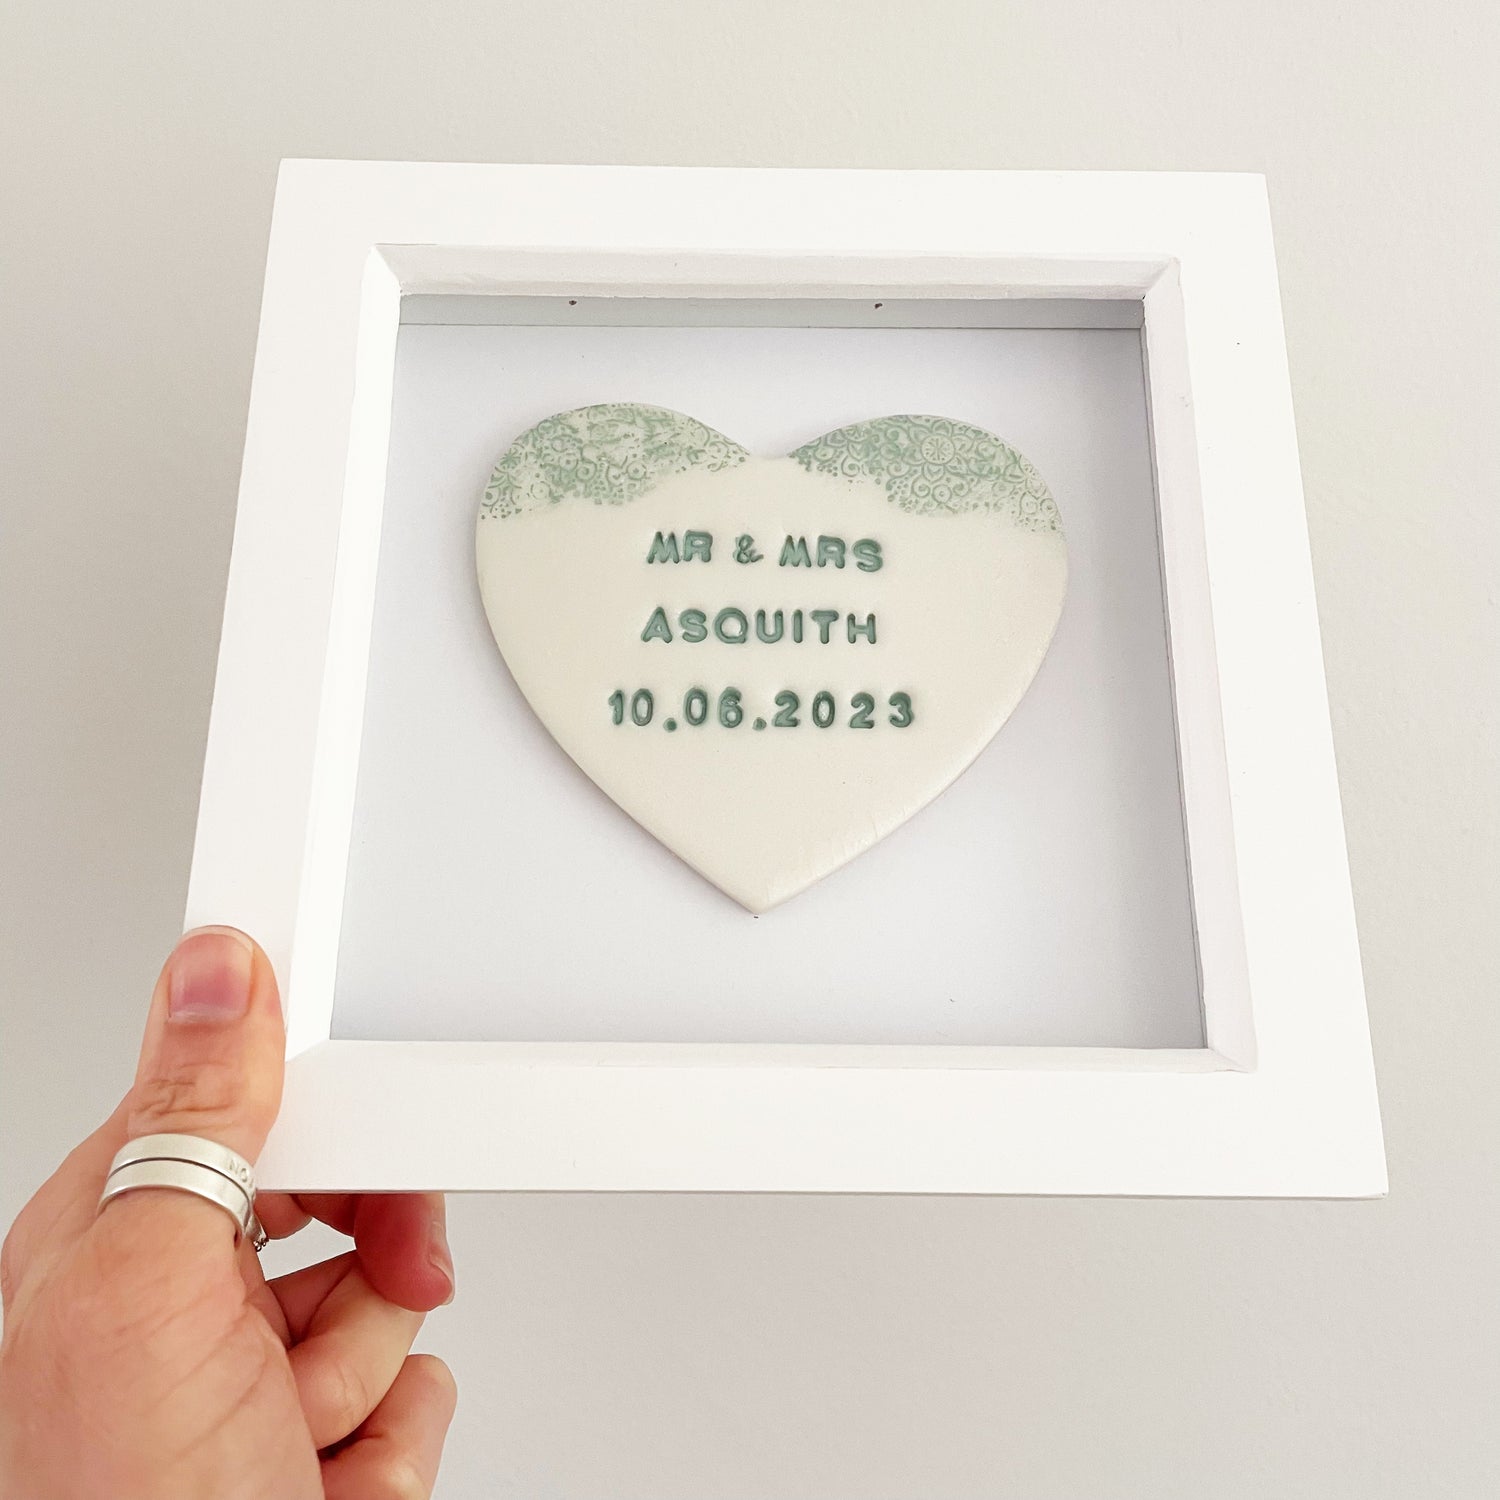 Personalised hanging wedding heart gift, pearlised white clay heart with a sage green lace edge at the top of the heart in a white box frame, the heart is personalised with MR & MRS ASQUITH 10.06.2023